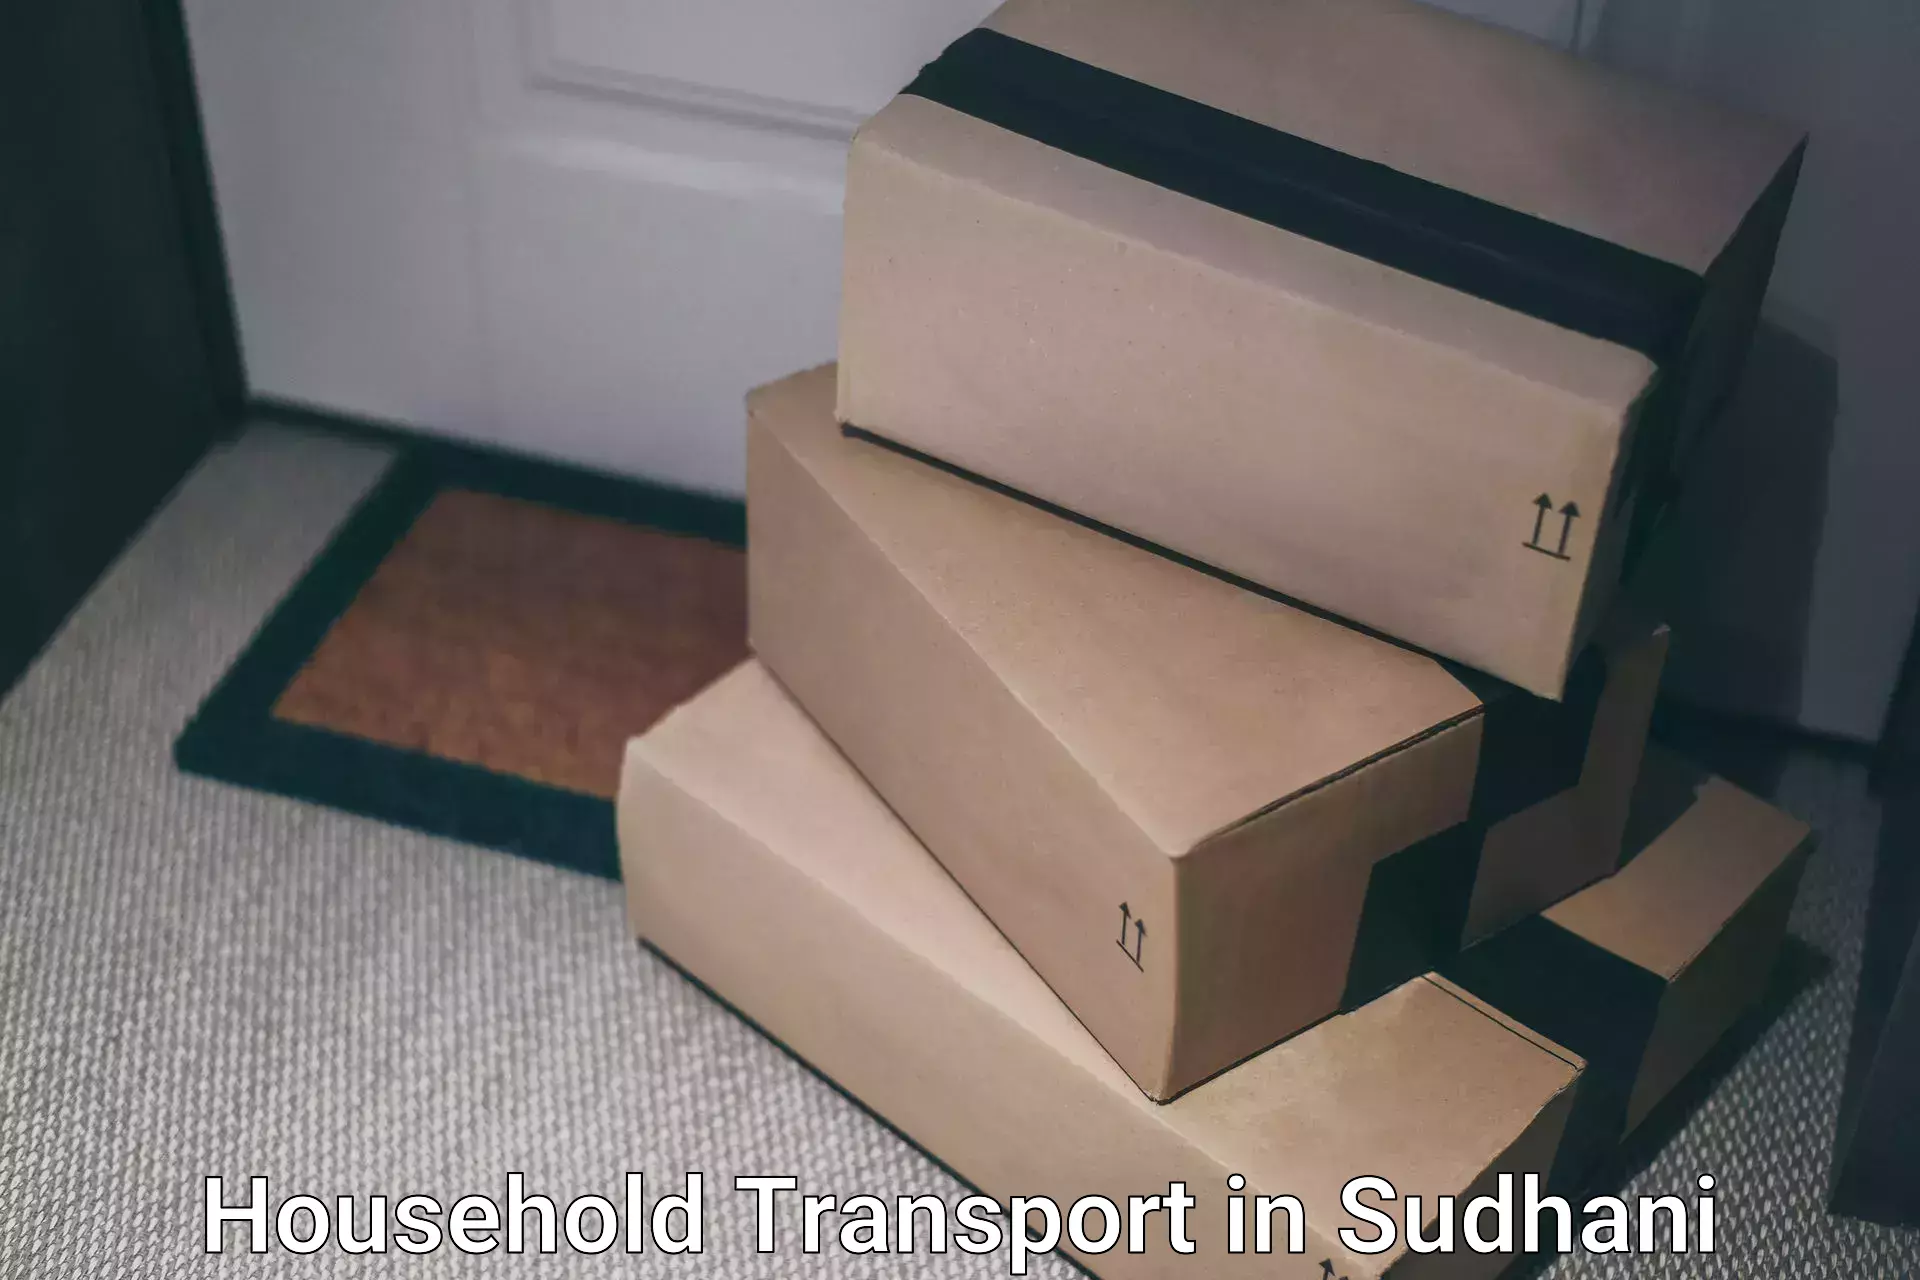 Furniture transport and storage in Sudhani